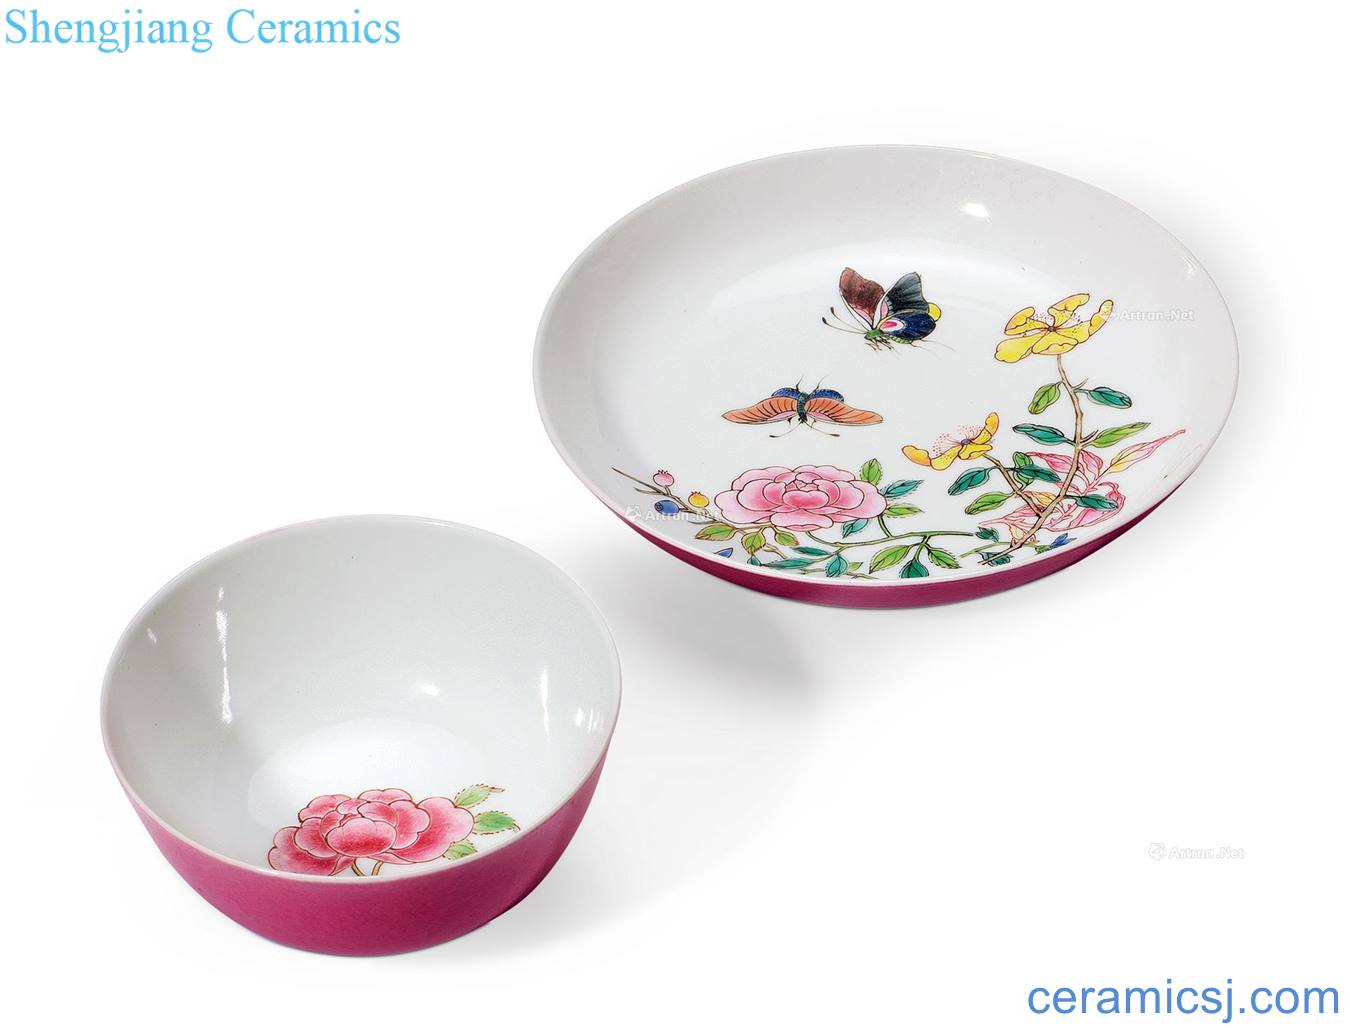 In the qing yongzheng carmine pastel dishes (a set of two)